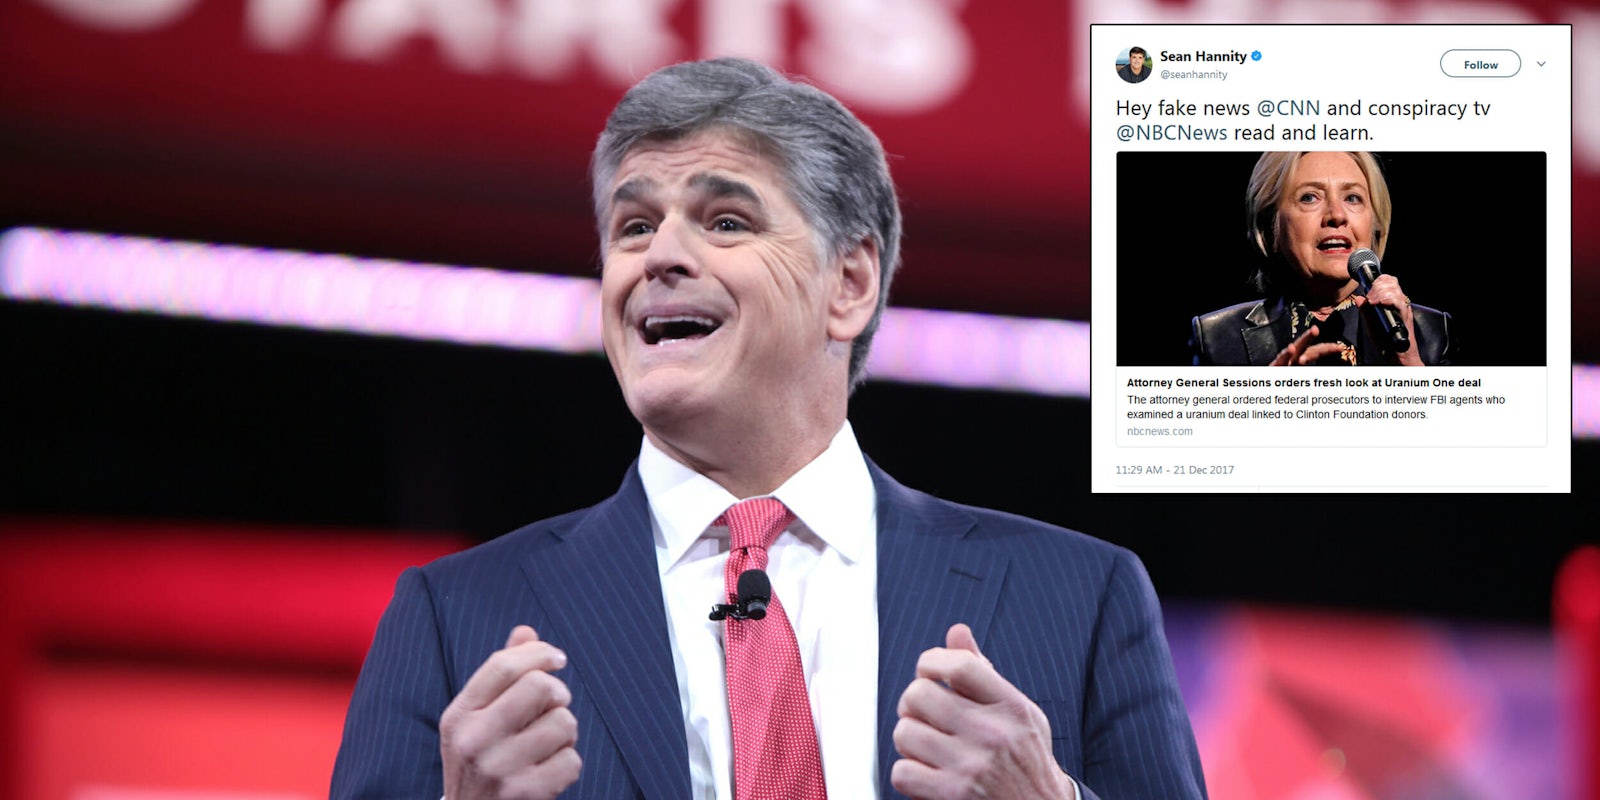 Sean Hannity was roasted on Twitter after he he slammed NBC News as 'conspiracy TV' while linking to an article from the news outlet in the same tweet.